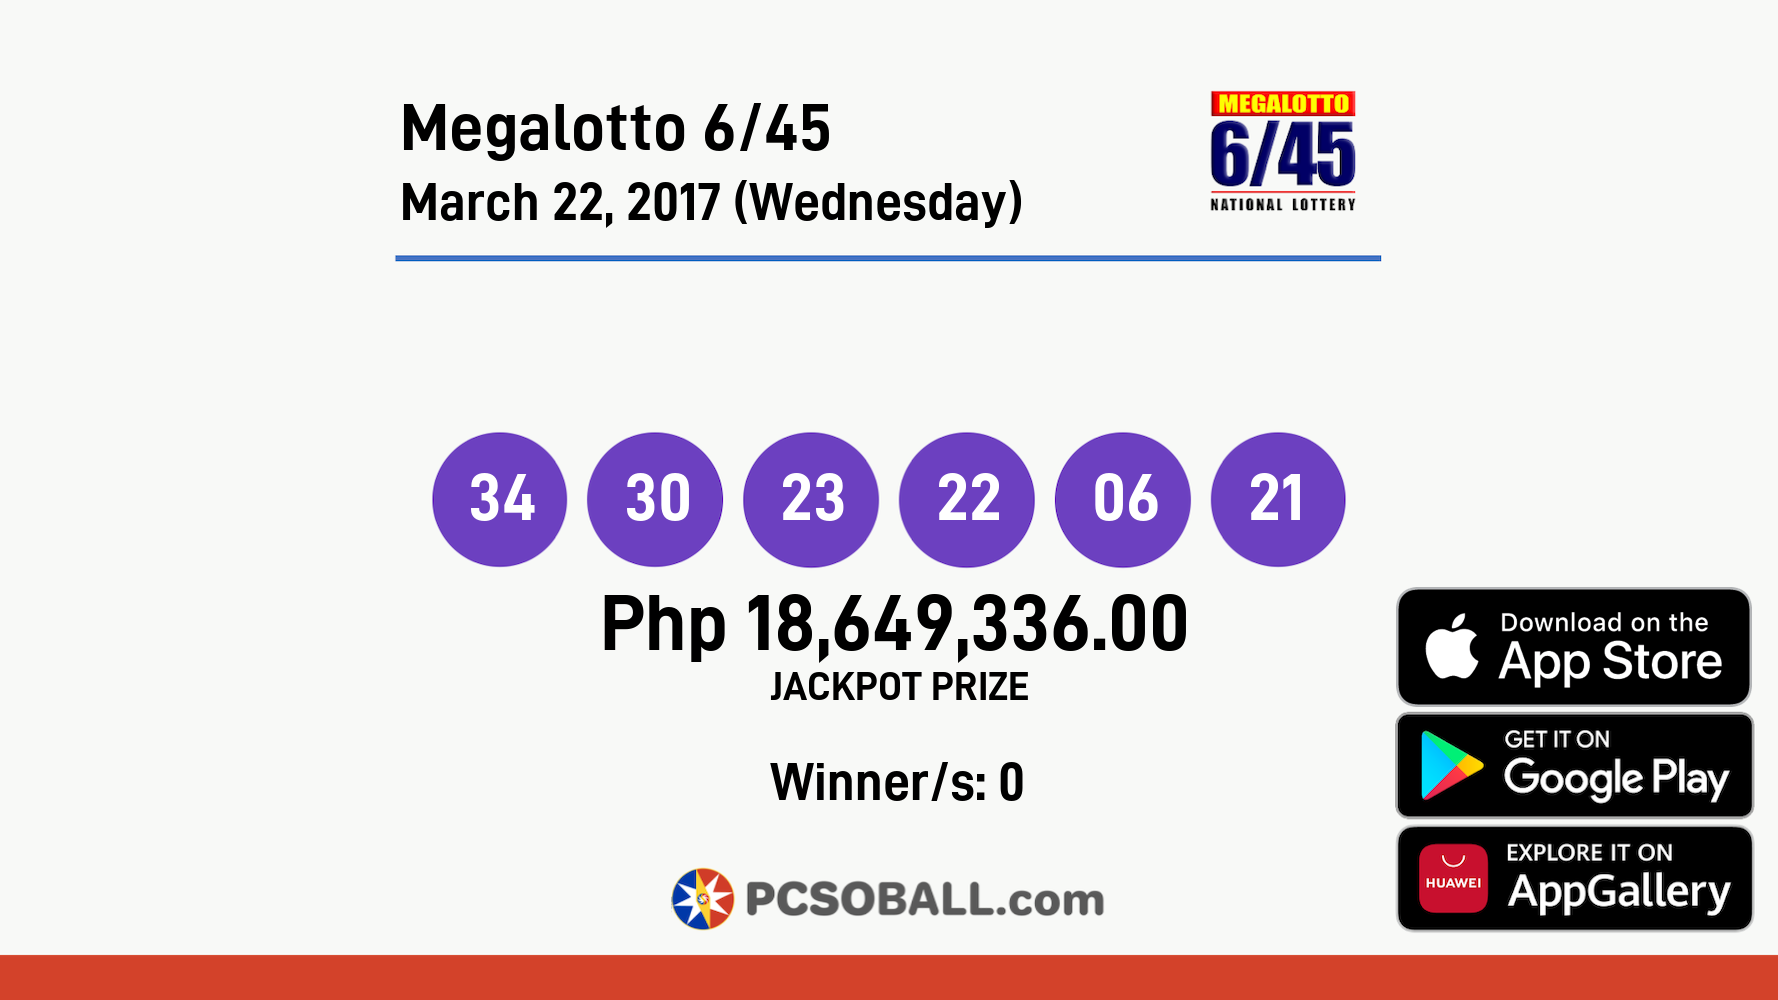 Megalotto 6/45 March 22, 2017 (Wednesday) Result